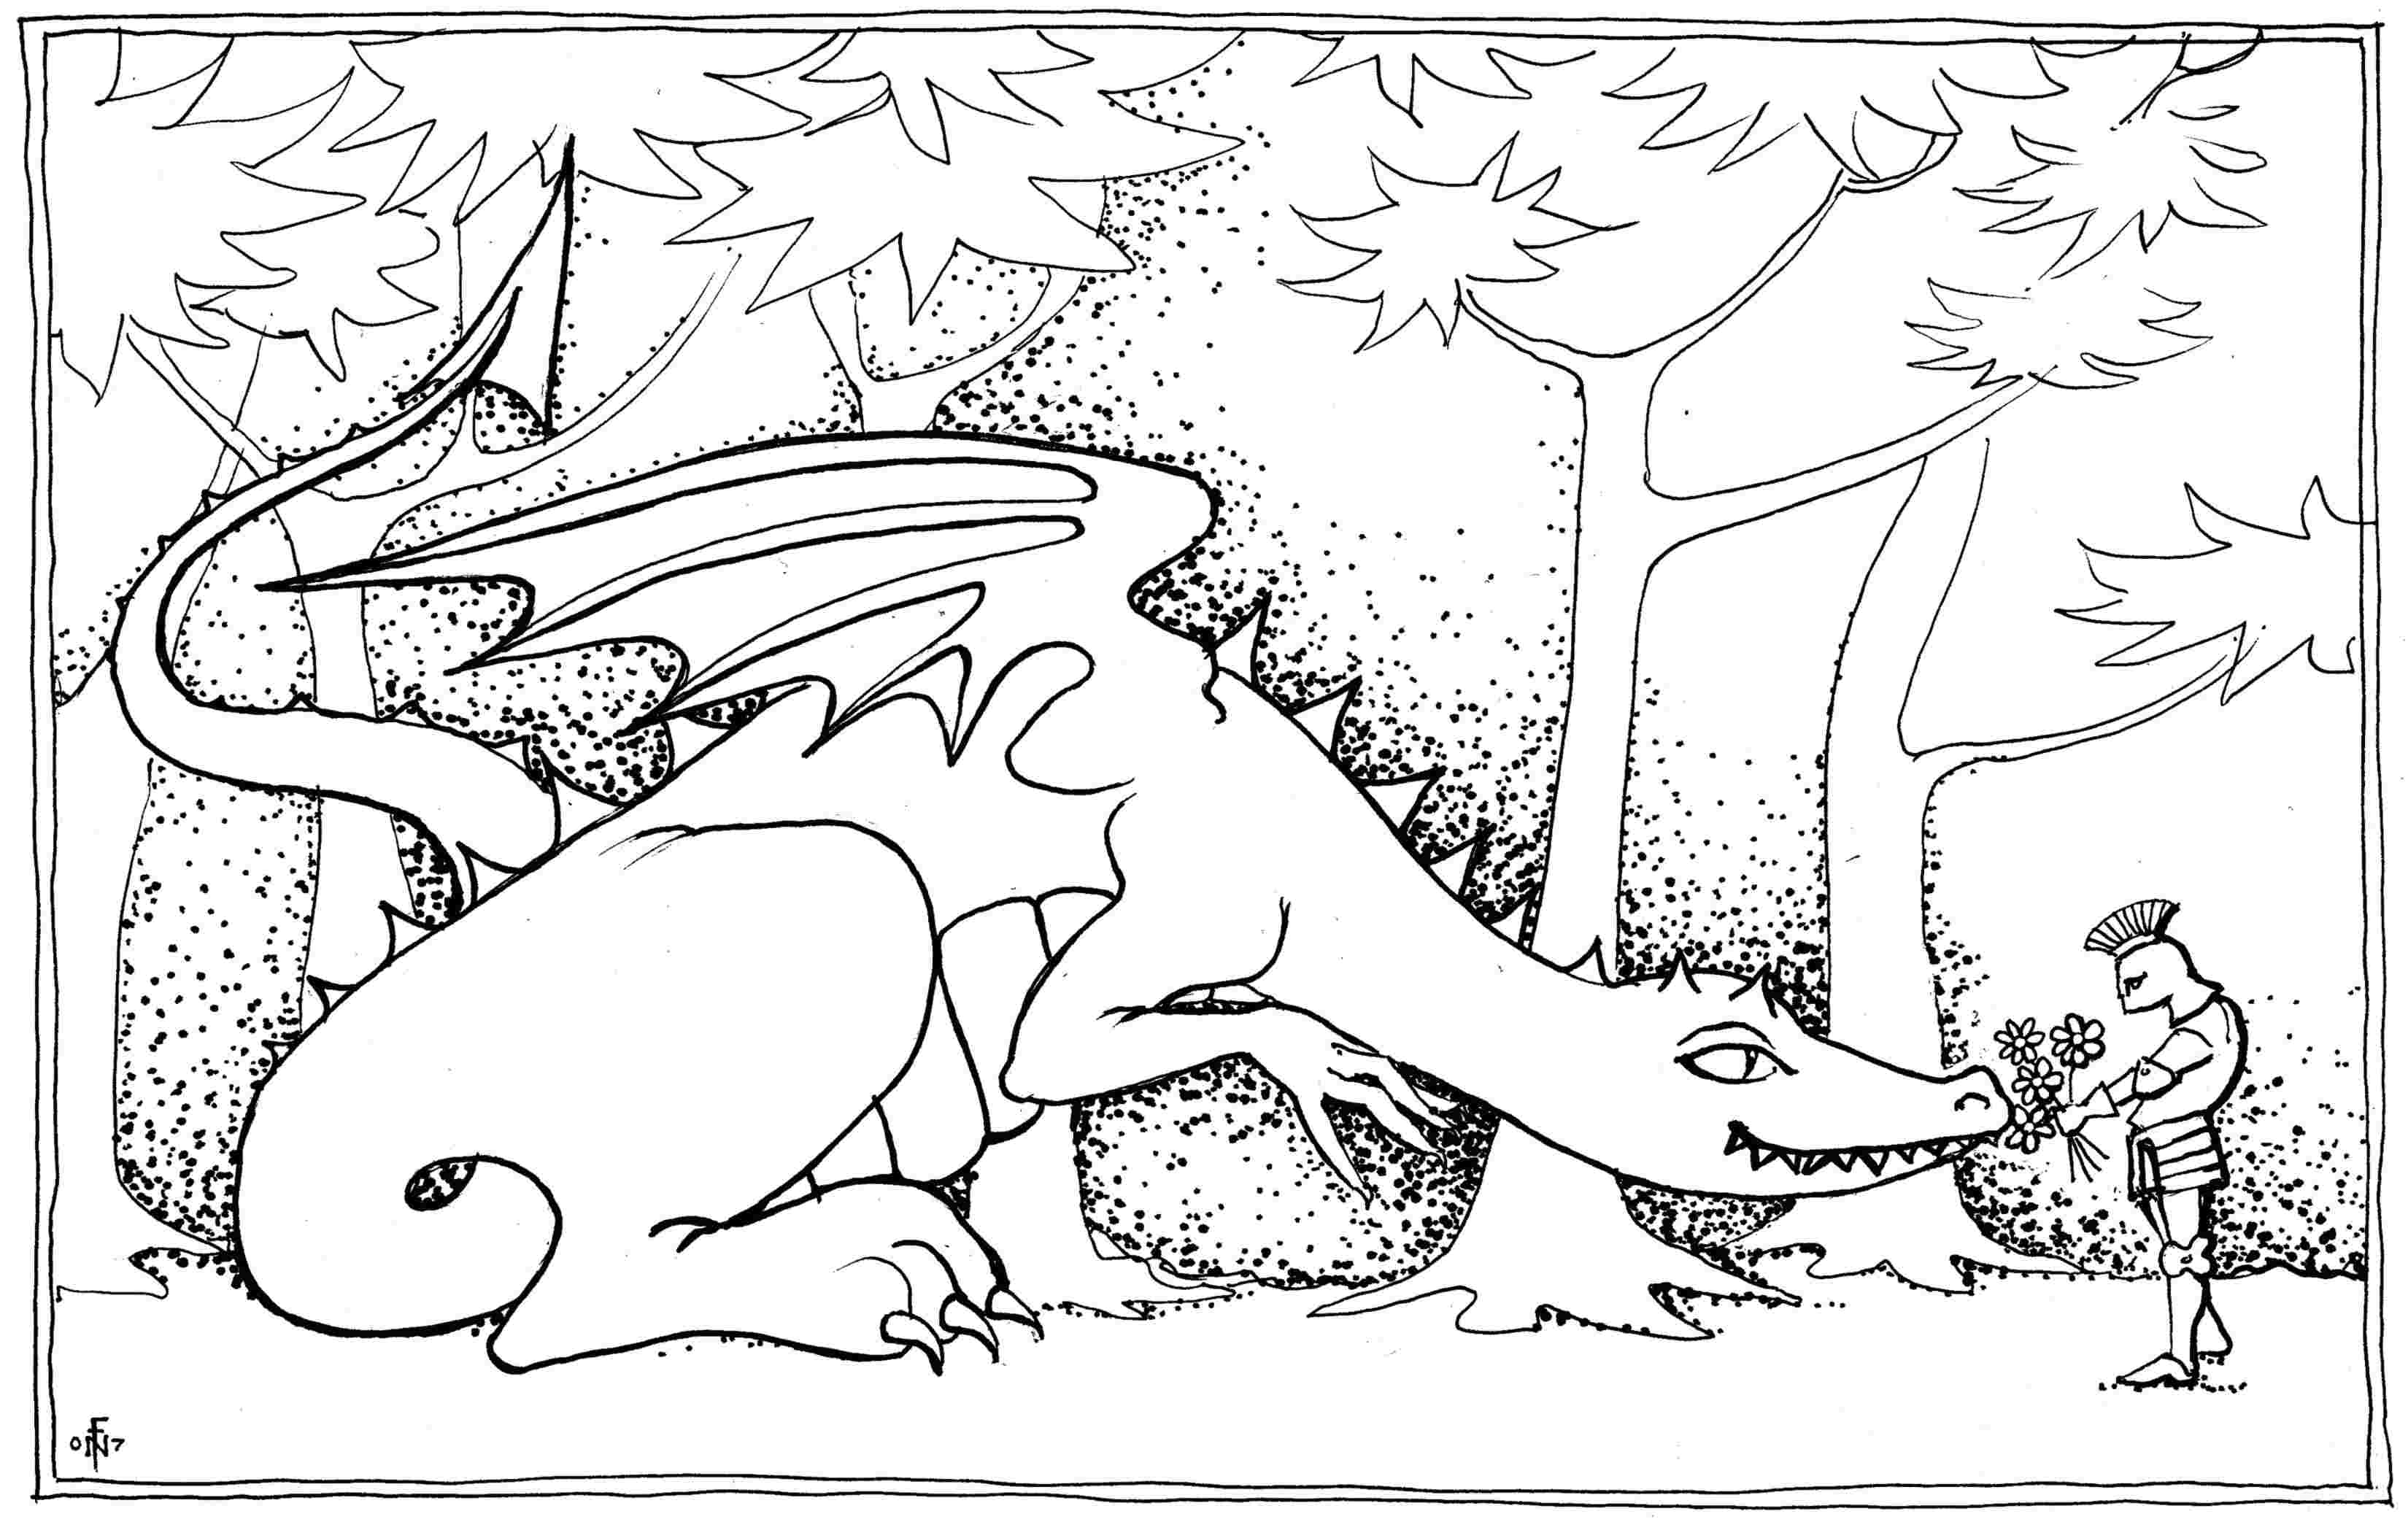 Dragon Bouquet - colouring-in drawing - to download, right click and save, print out and colour in!